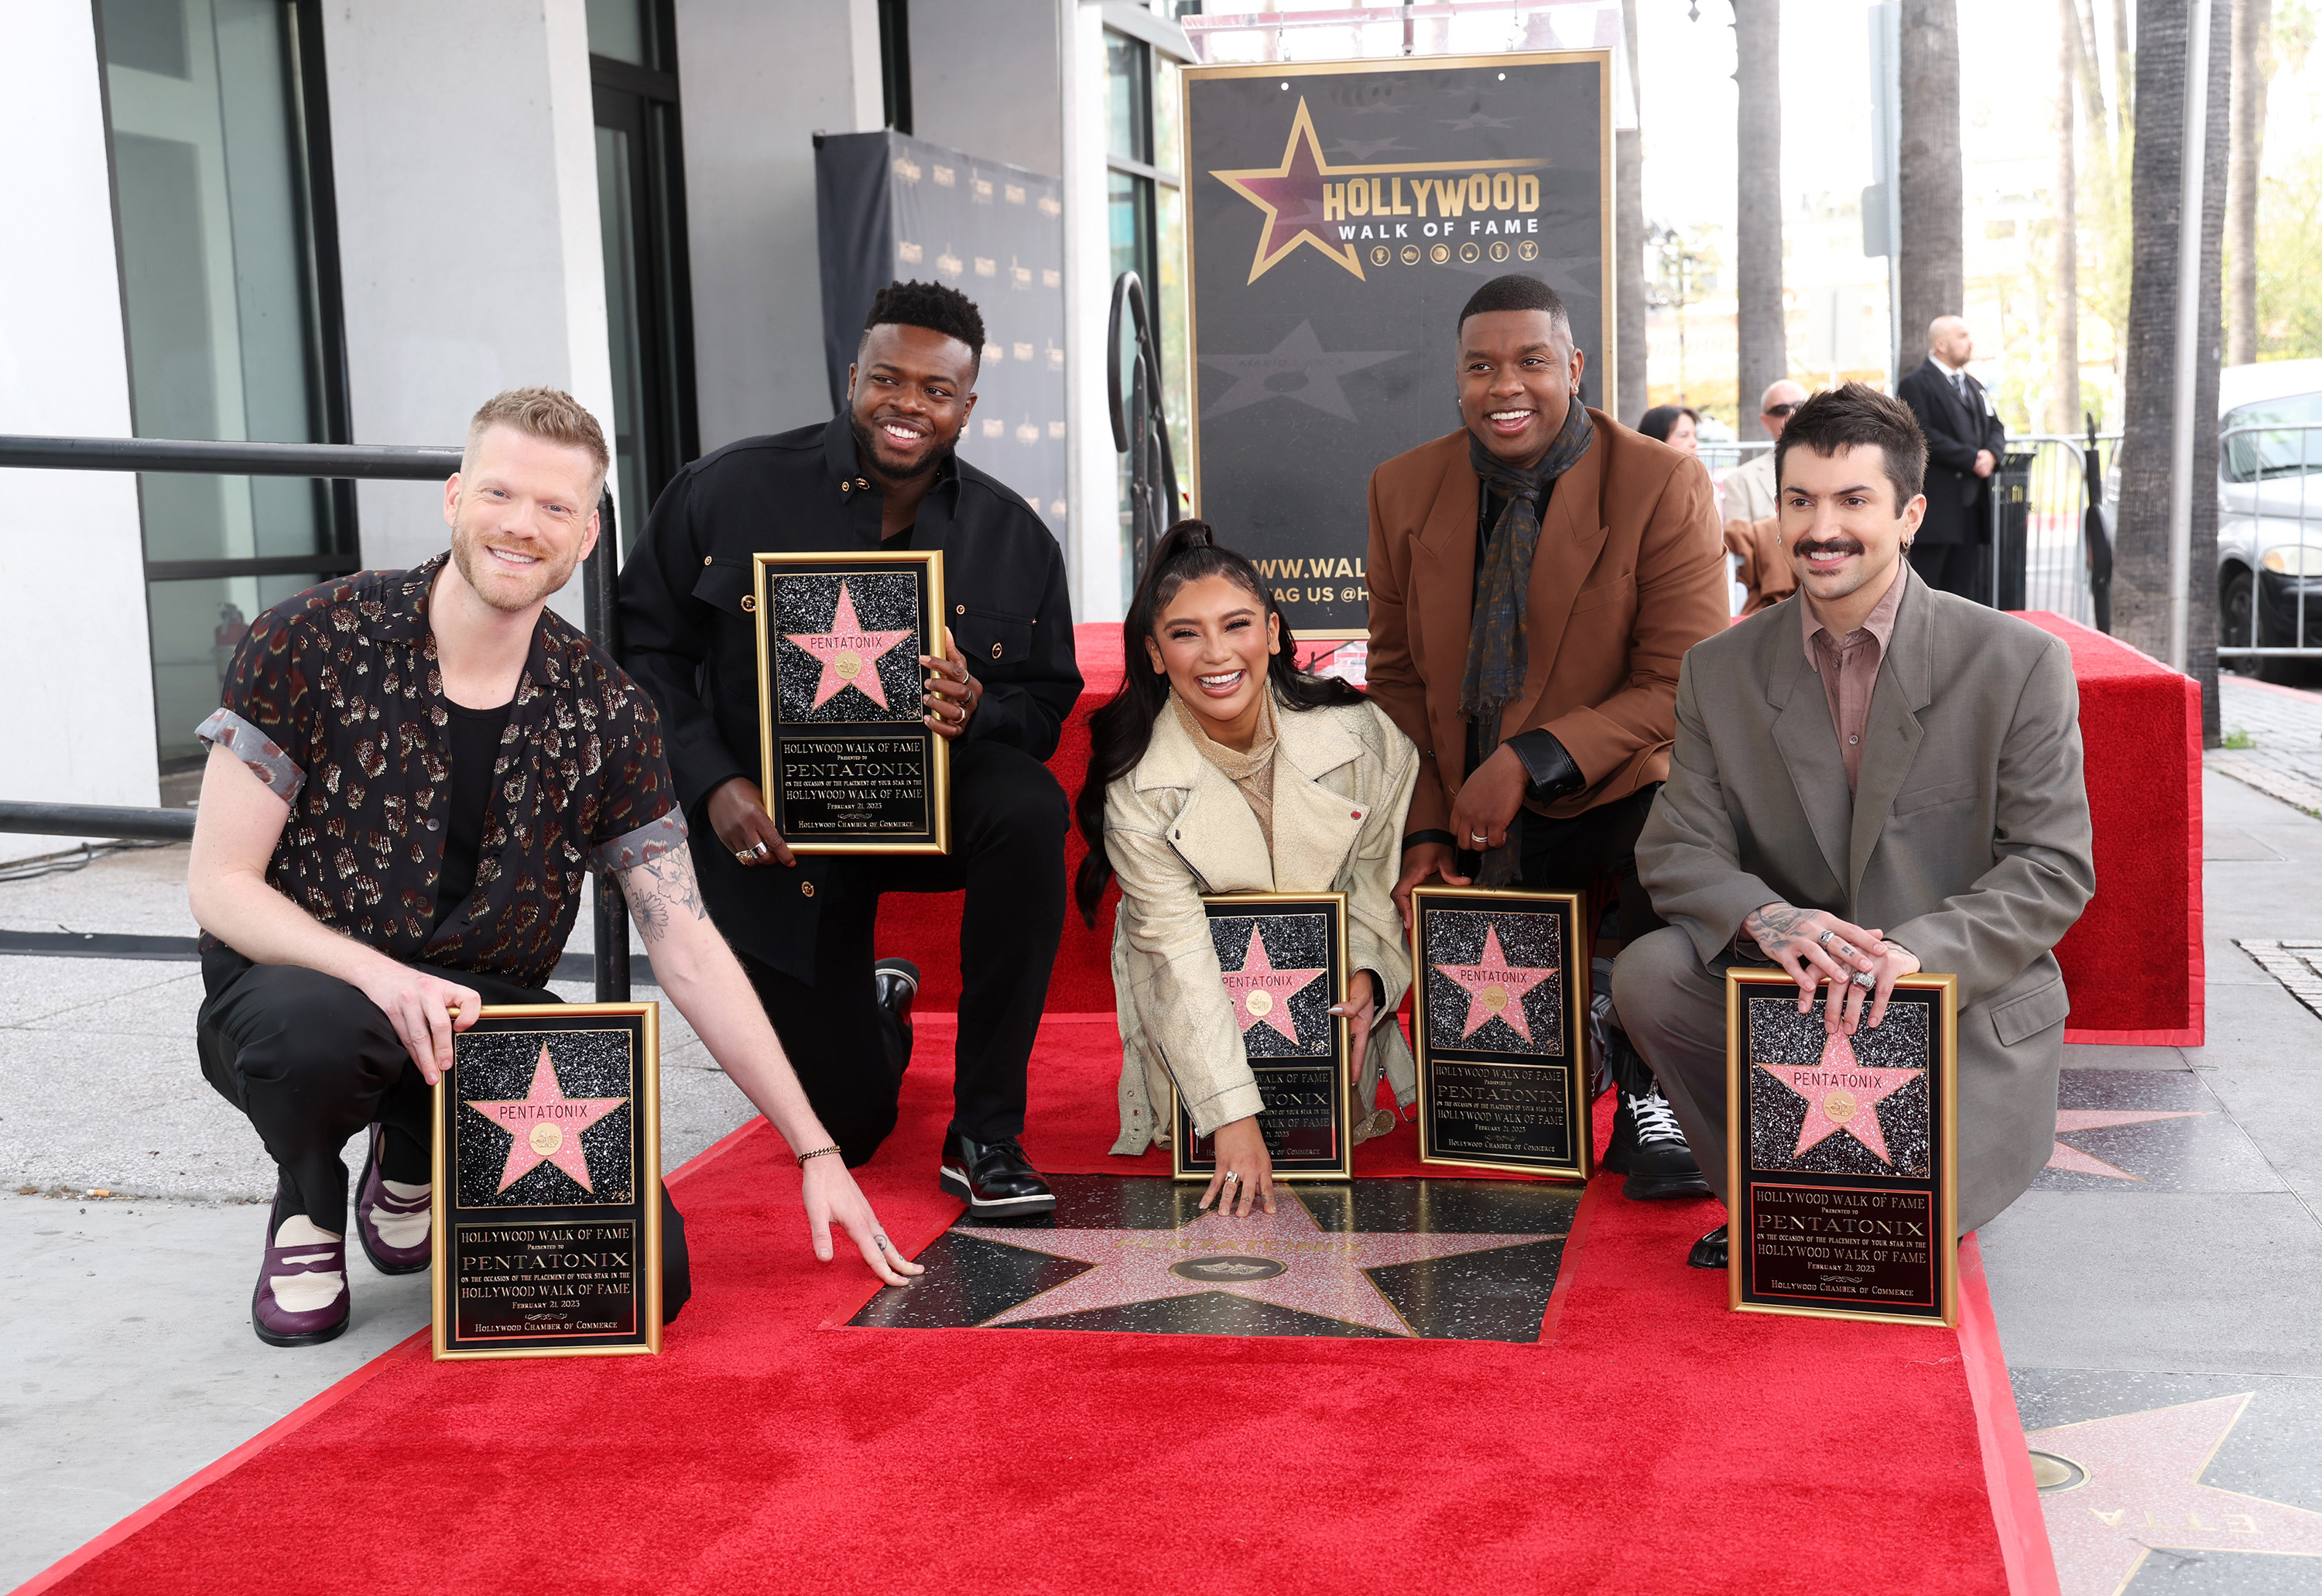 (L-R) Scott Hoying, Kevin Olusola, Kirstin Maldonado, Matt Sallee and Mitch Grassi of Pentatonix attend their star ceremony where Pentatonix is honored with a star on the Hollywood Walk of Fame on Feb. 21, 2023, in Hollywood, Calif.